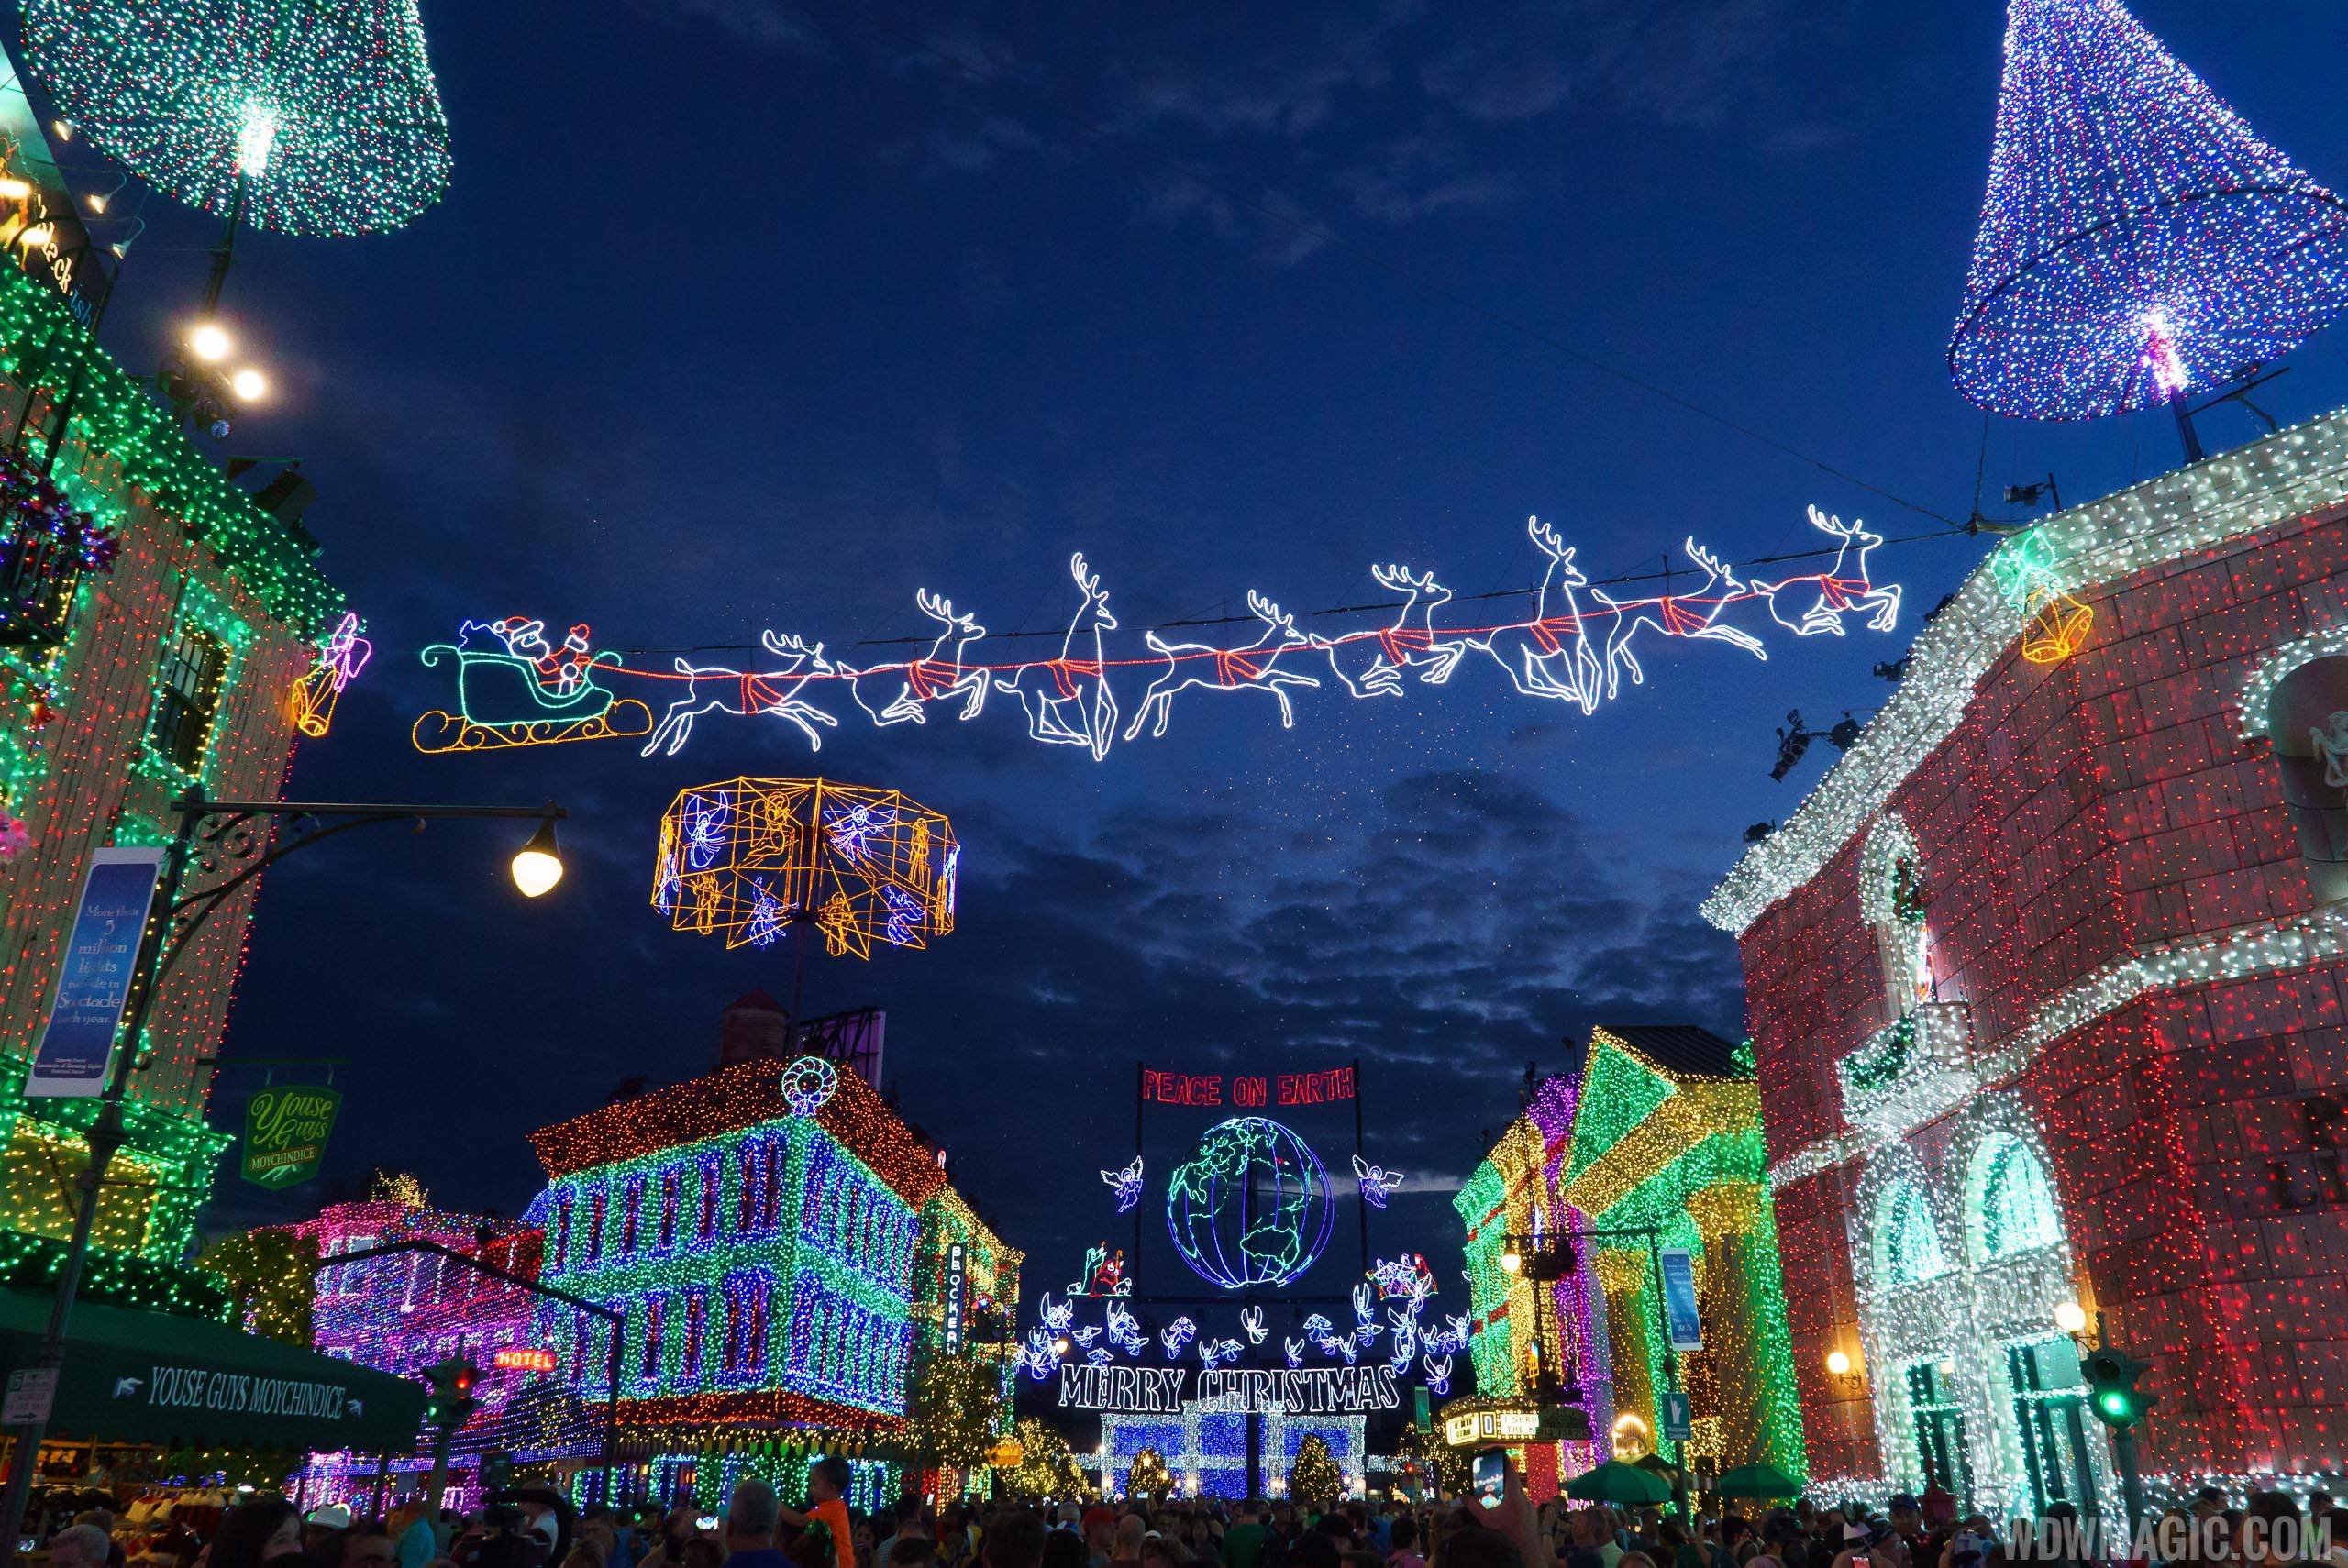 What's new at this year's Osborne Family Spectacle of Dancing Lights